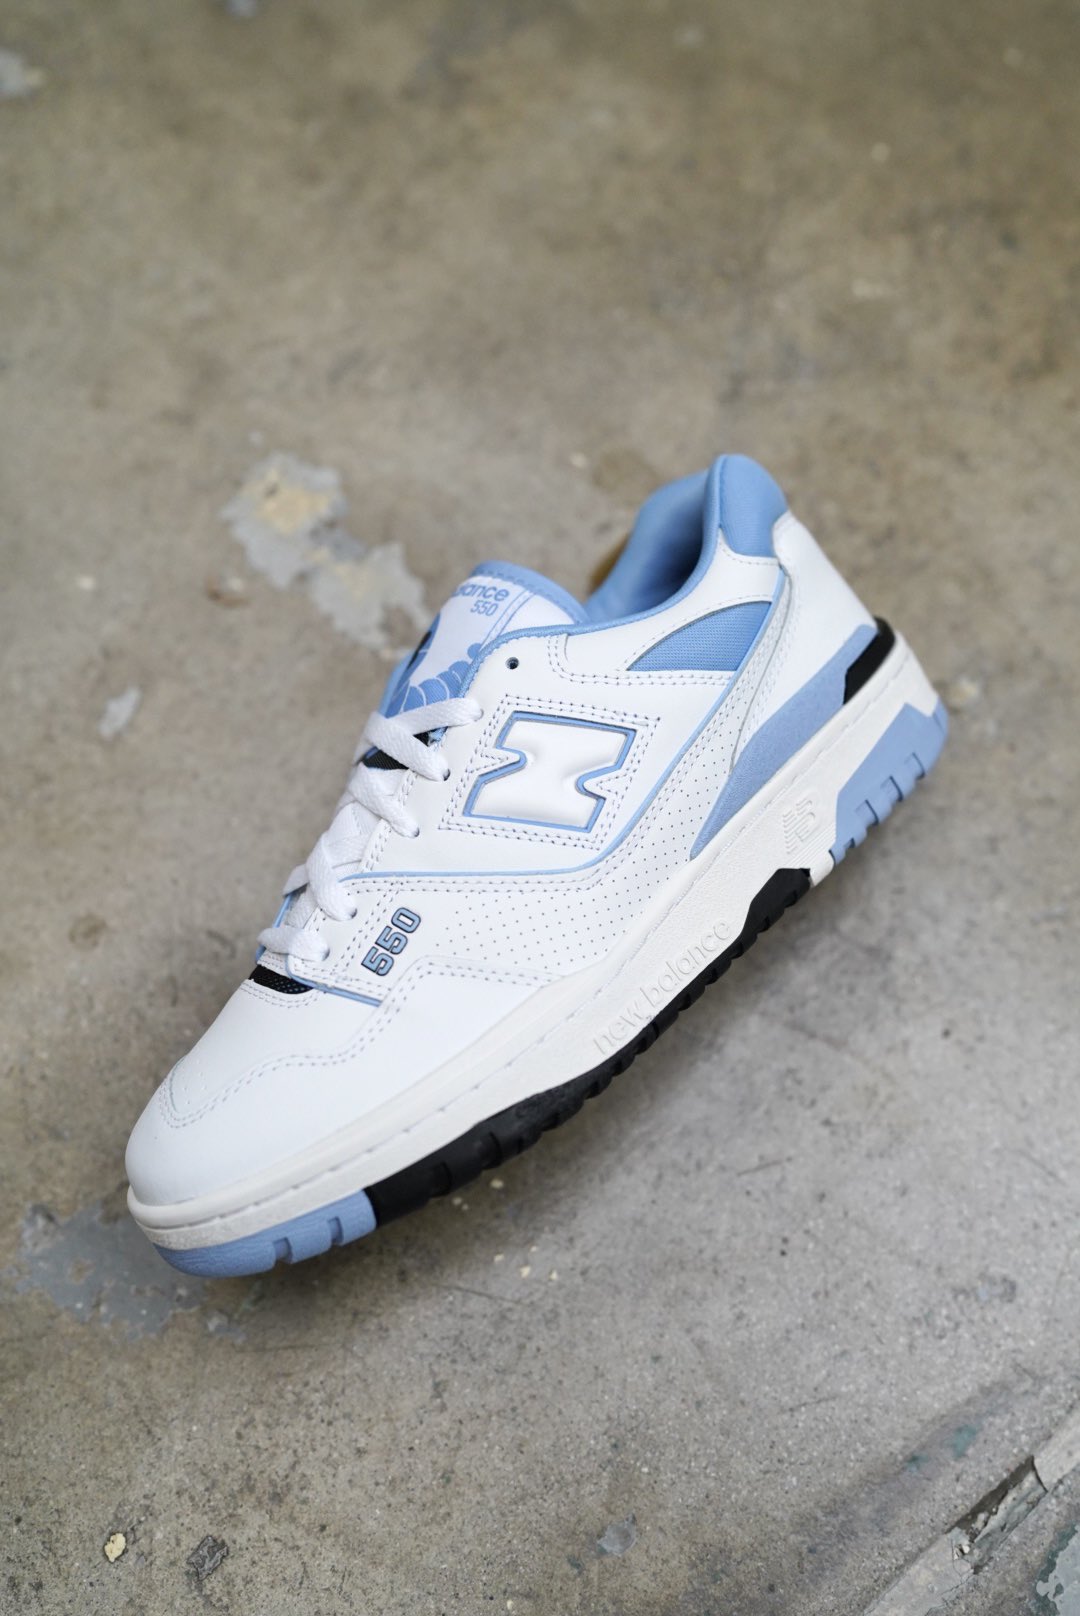 NEO Pasadena on Twitter: "New Balance BB550HL1 available in-store today  (12/29/21). FCFS limited to one pair per customer. https://t.co/7cCHvvkoWC"  / Twitter